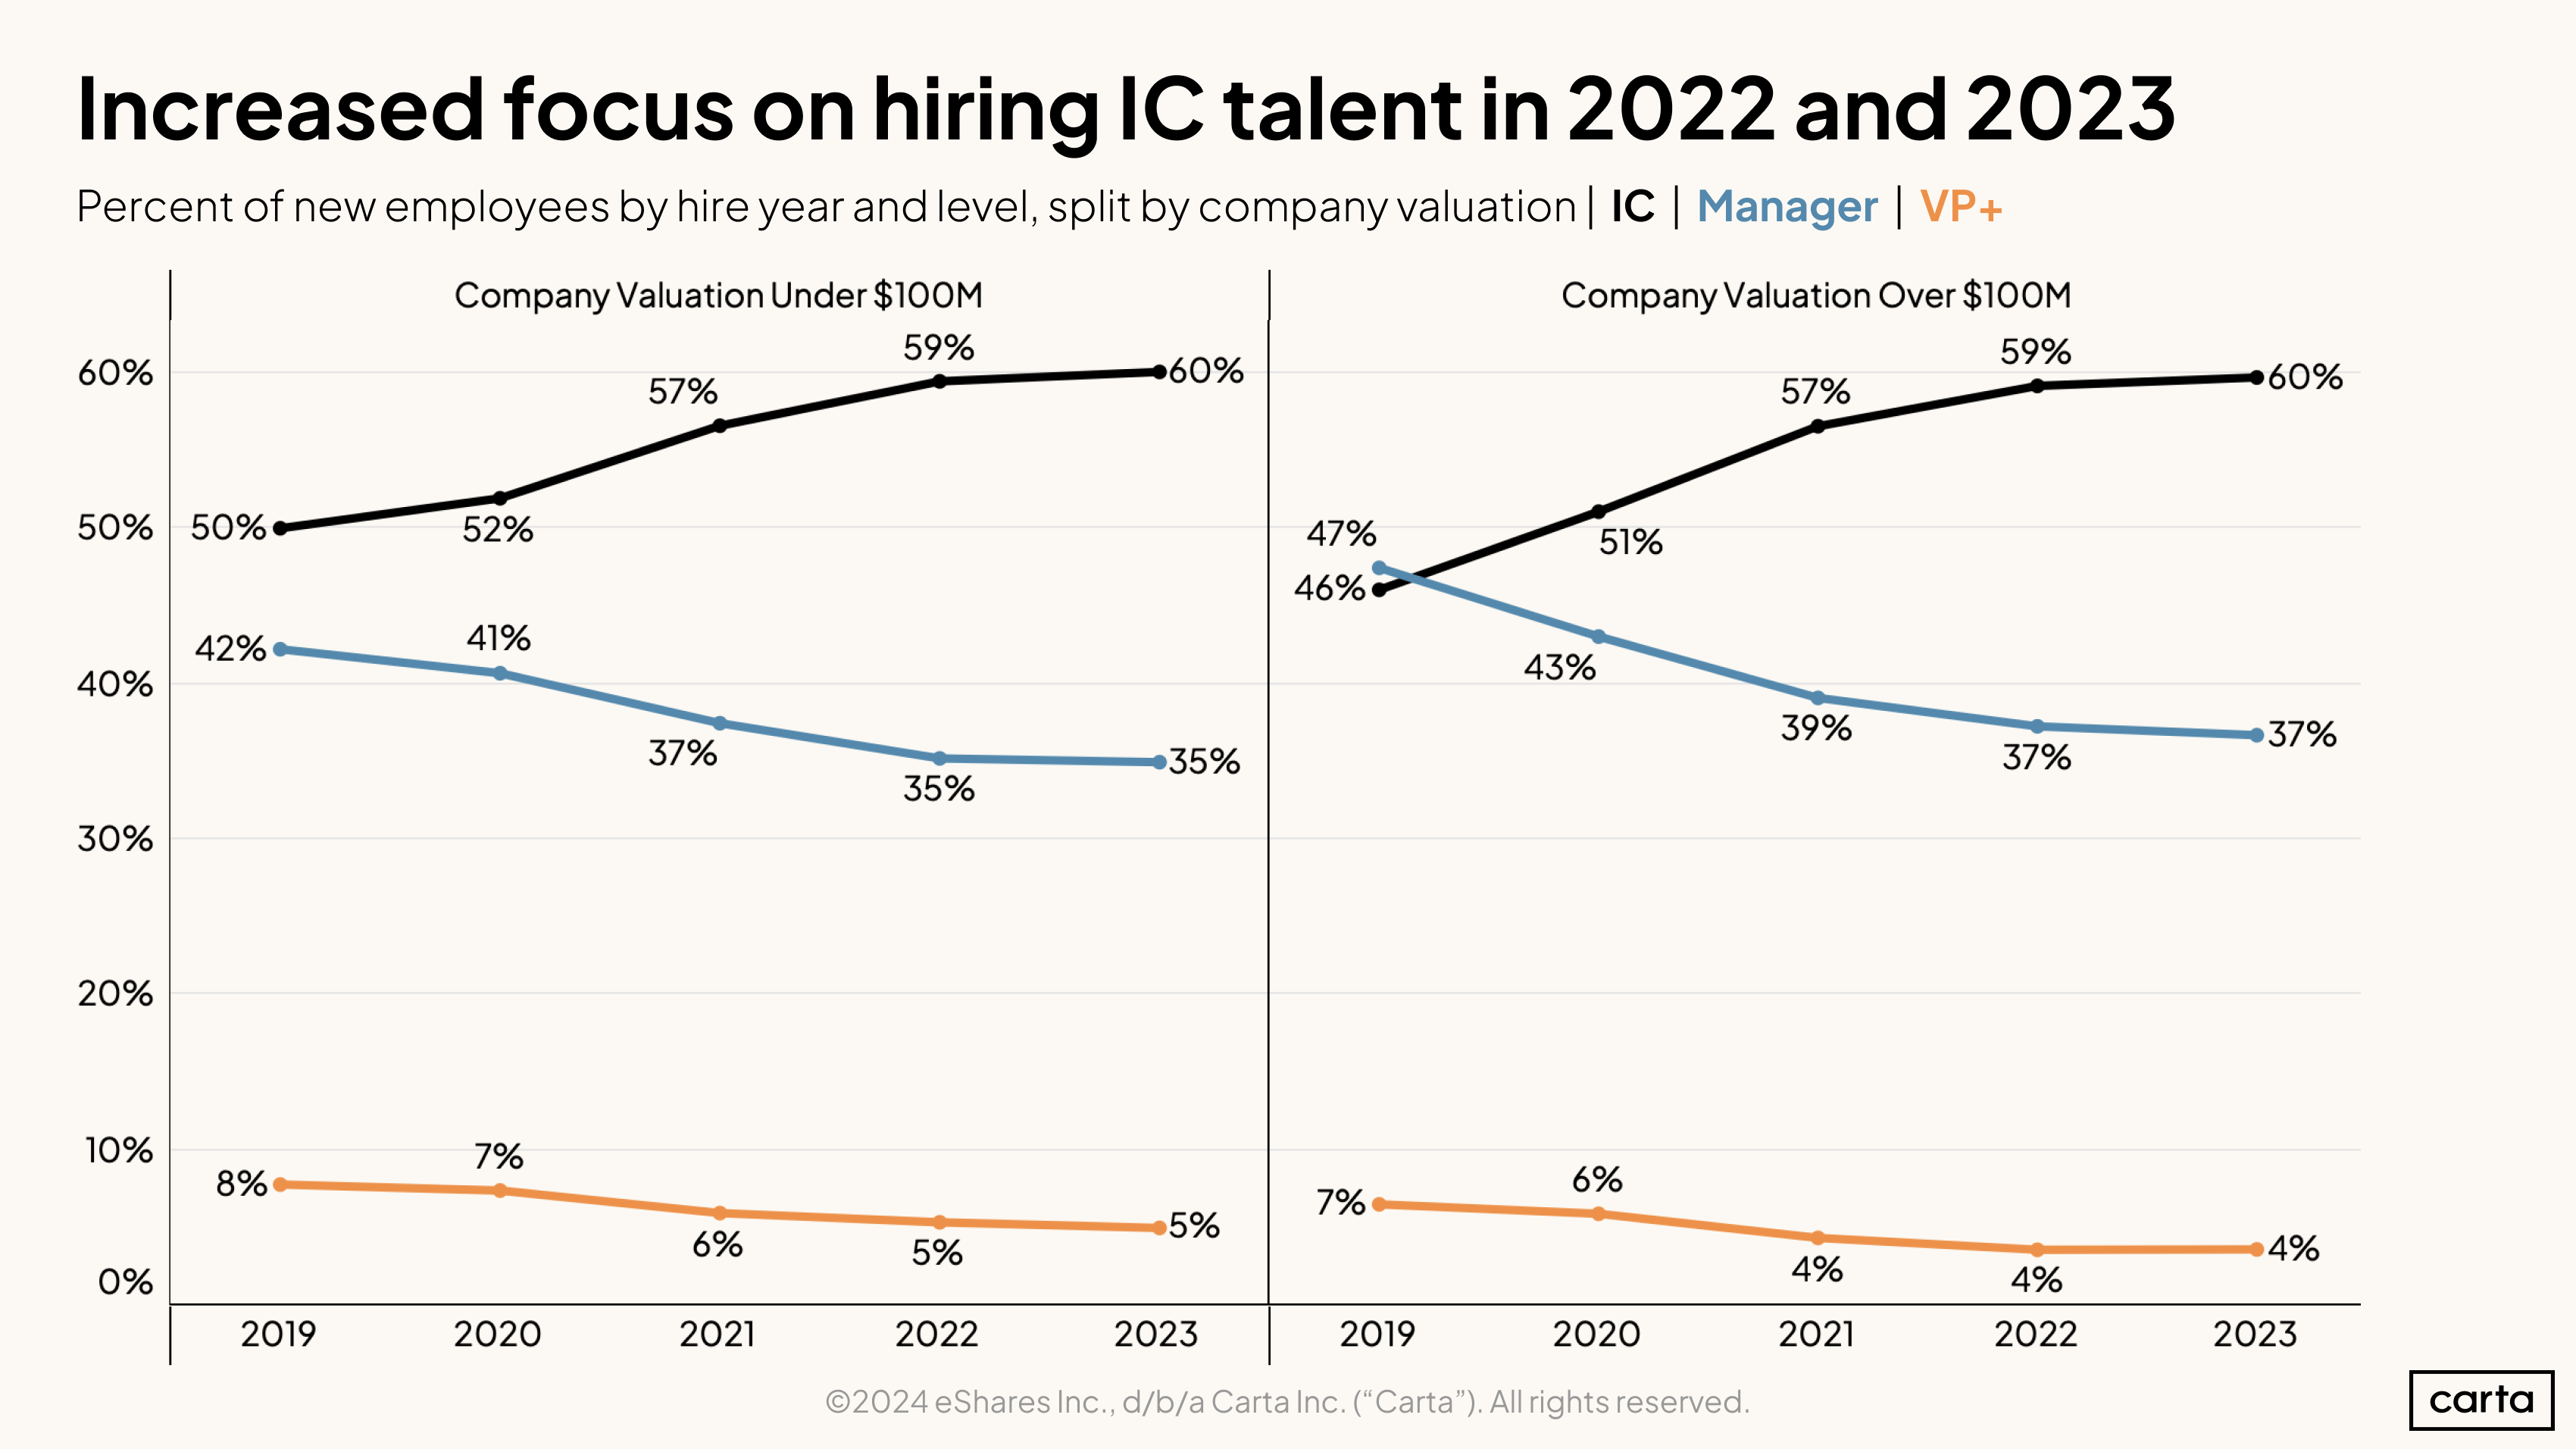 Increased focus on hiring IC talent in 2022 and 2023